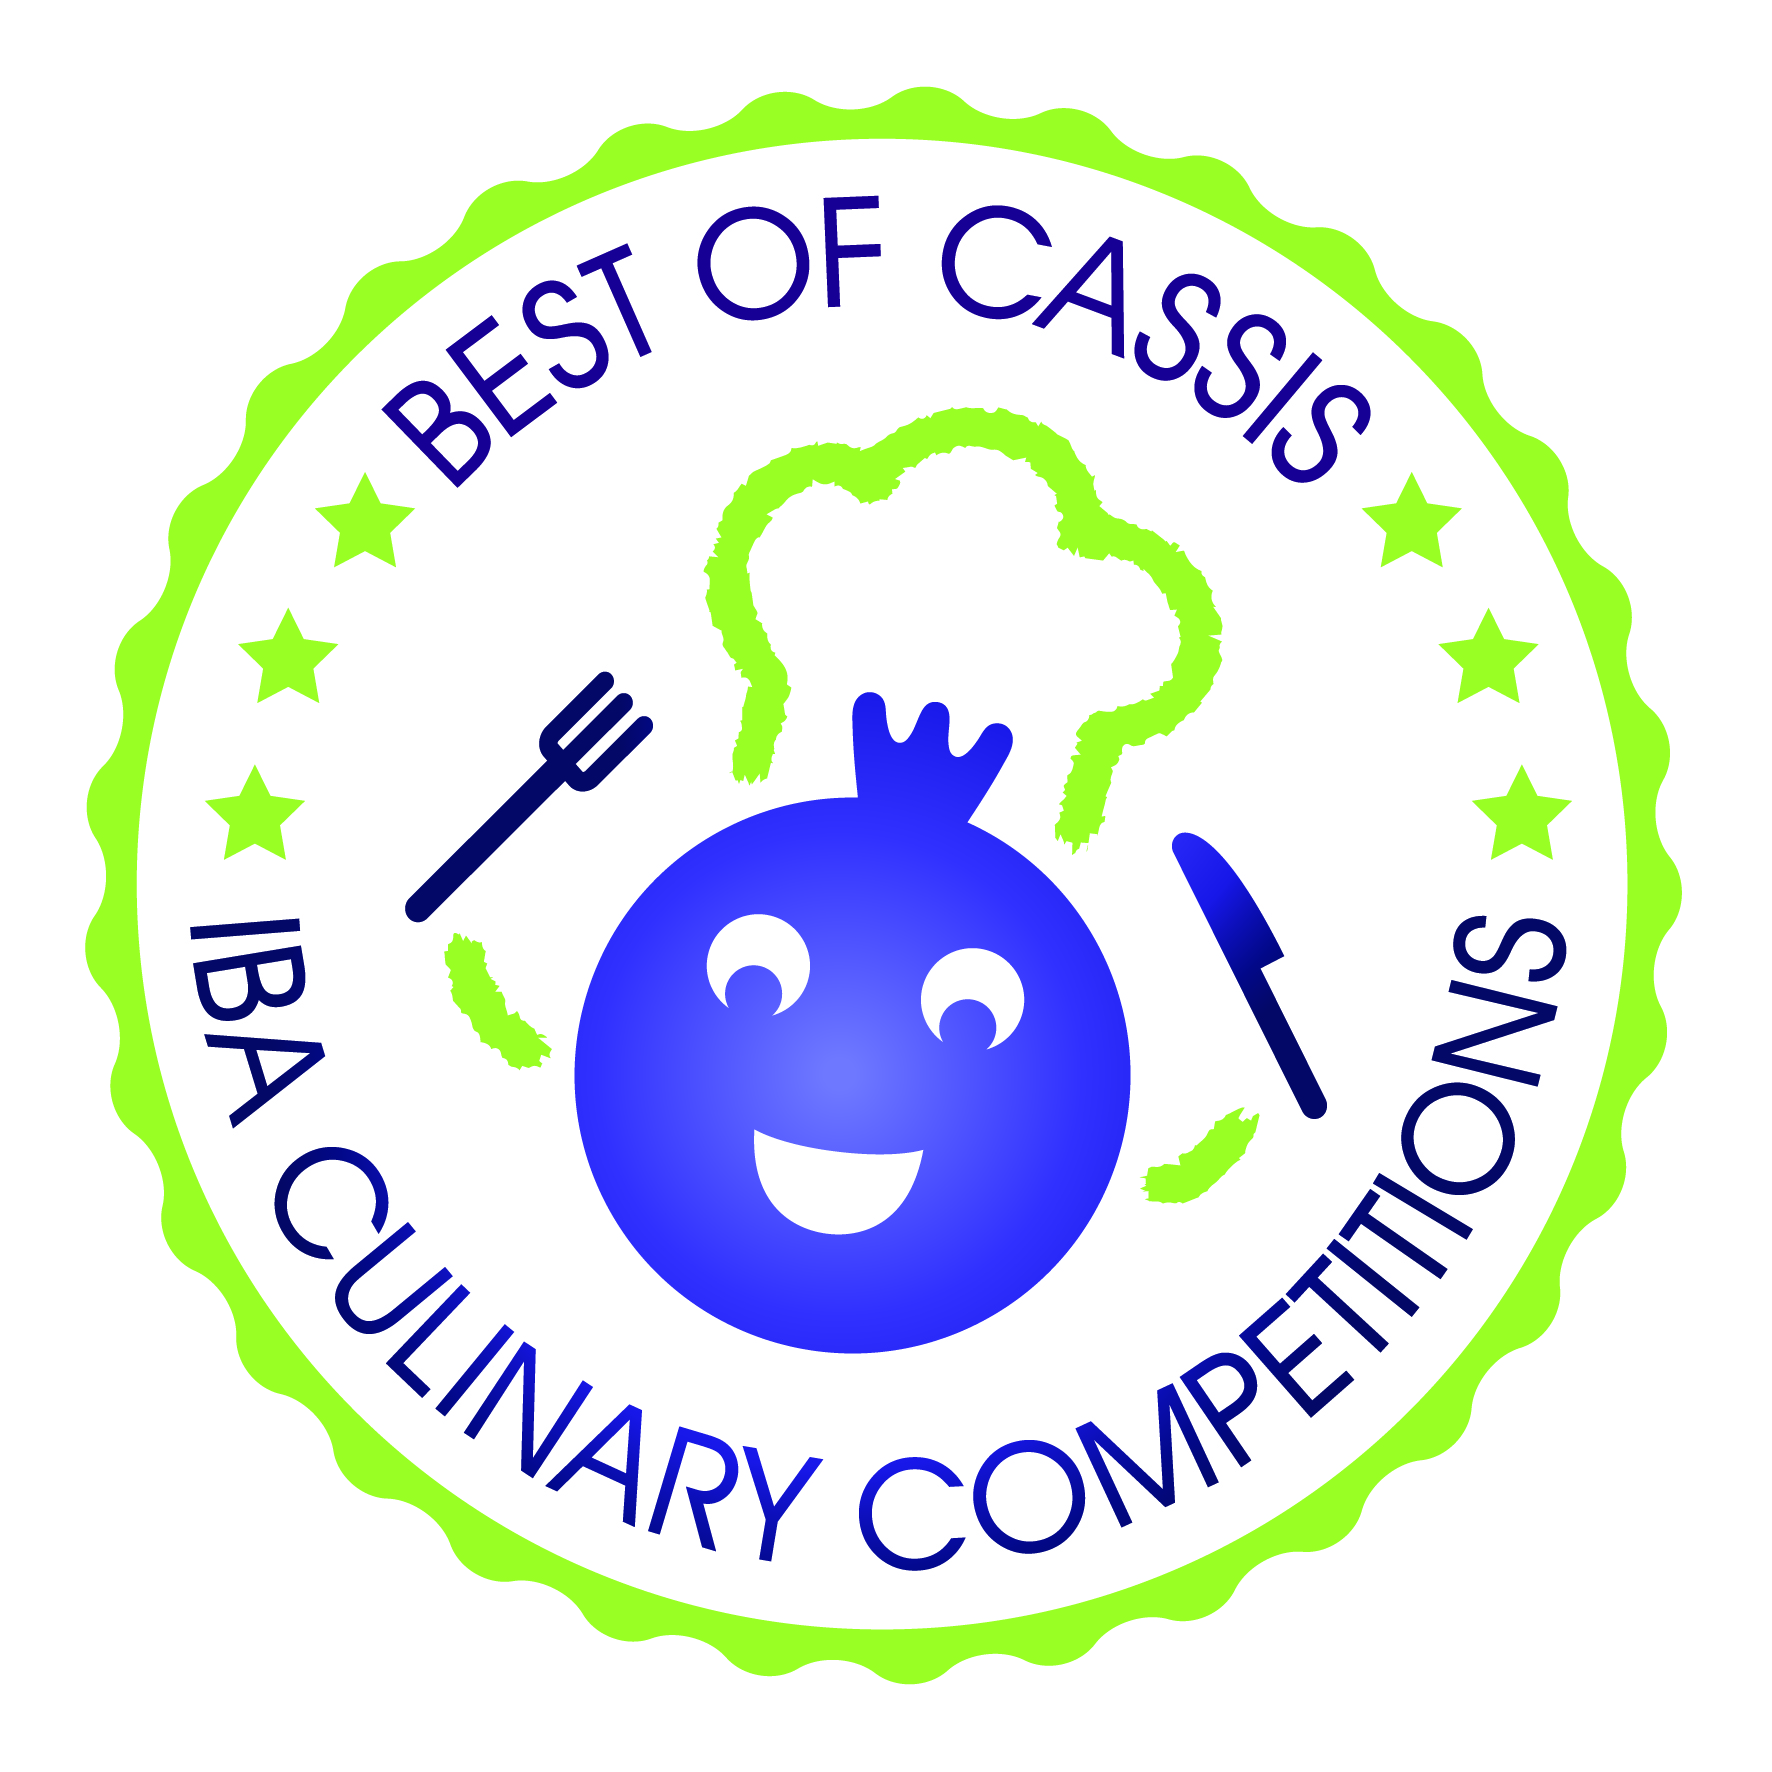 round logo in green and violet, showing a blackcurrant with fork and knife in hands and a chef's hat. The name is "best of cassis" - "IBA culinary competitions"